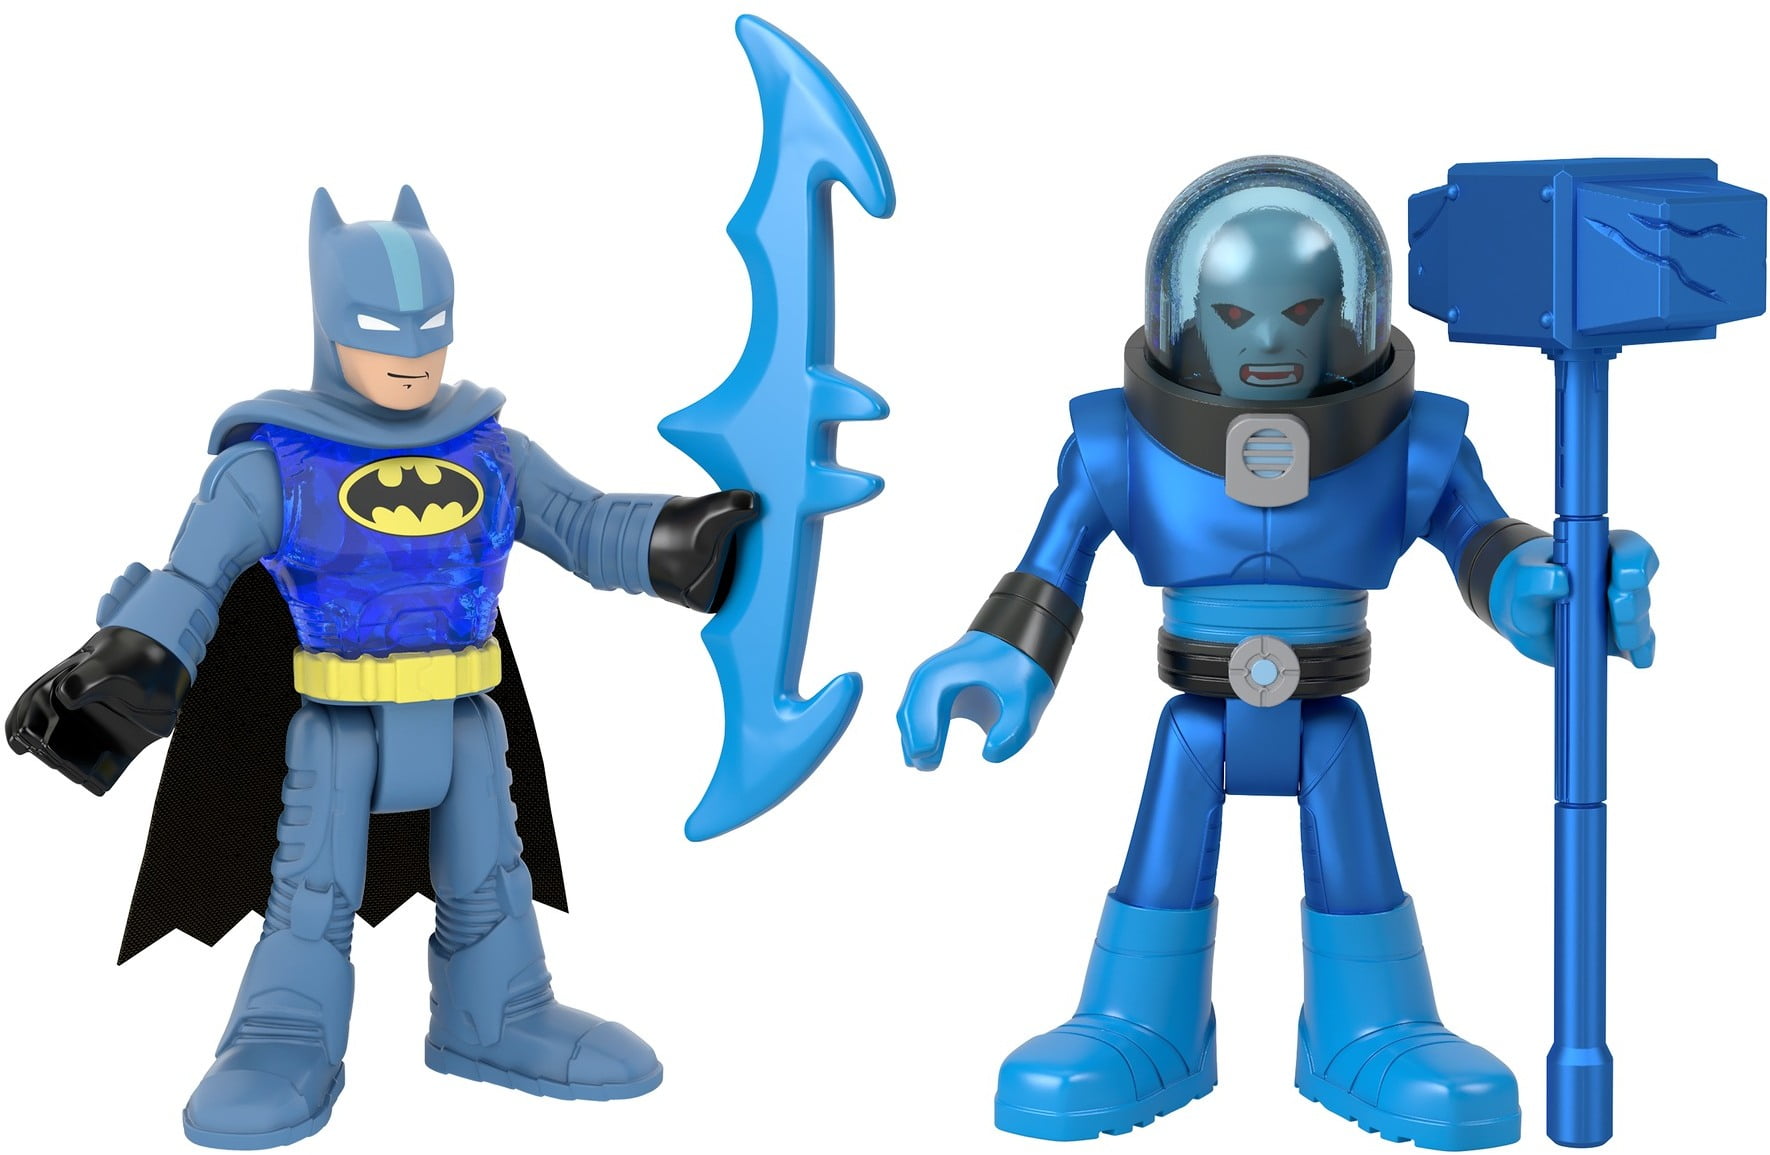 Select your figures Fisher Price IMAGINEXT DC Super Friends Justice League 